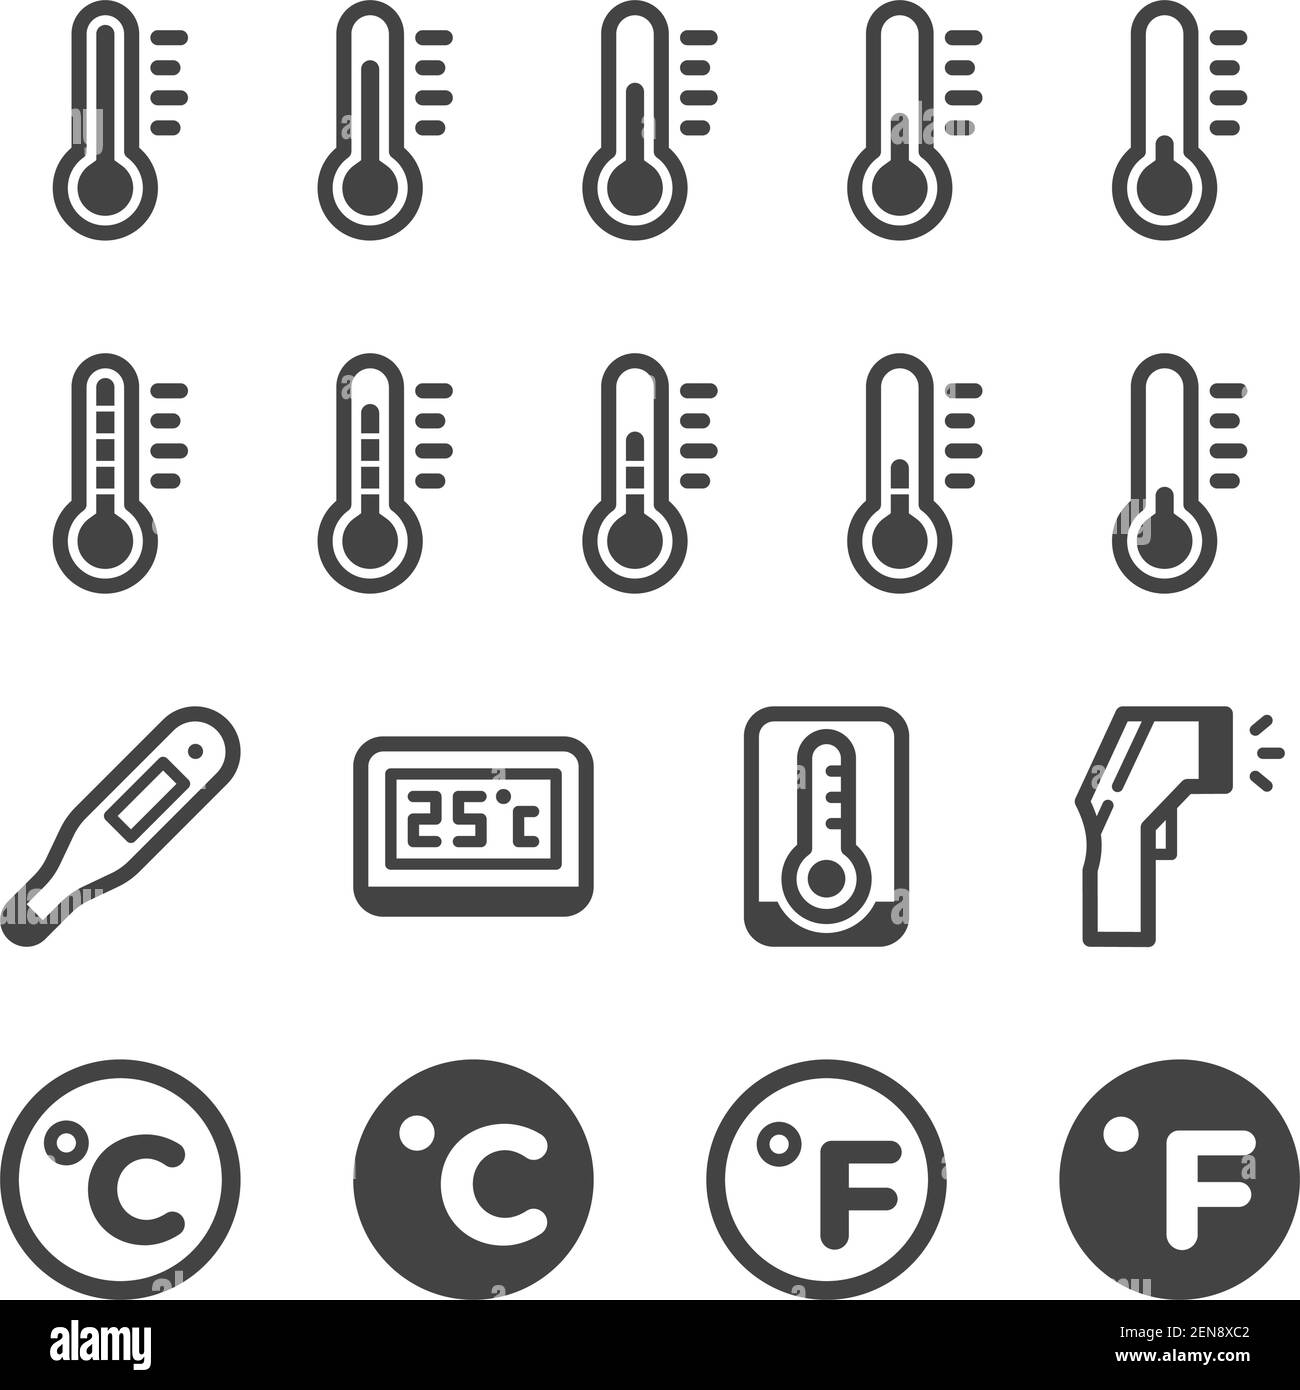 thermometer and temperature icon set,vector and illustration Stock Vector